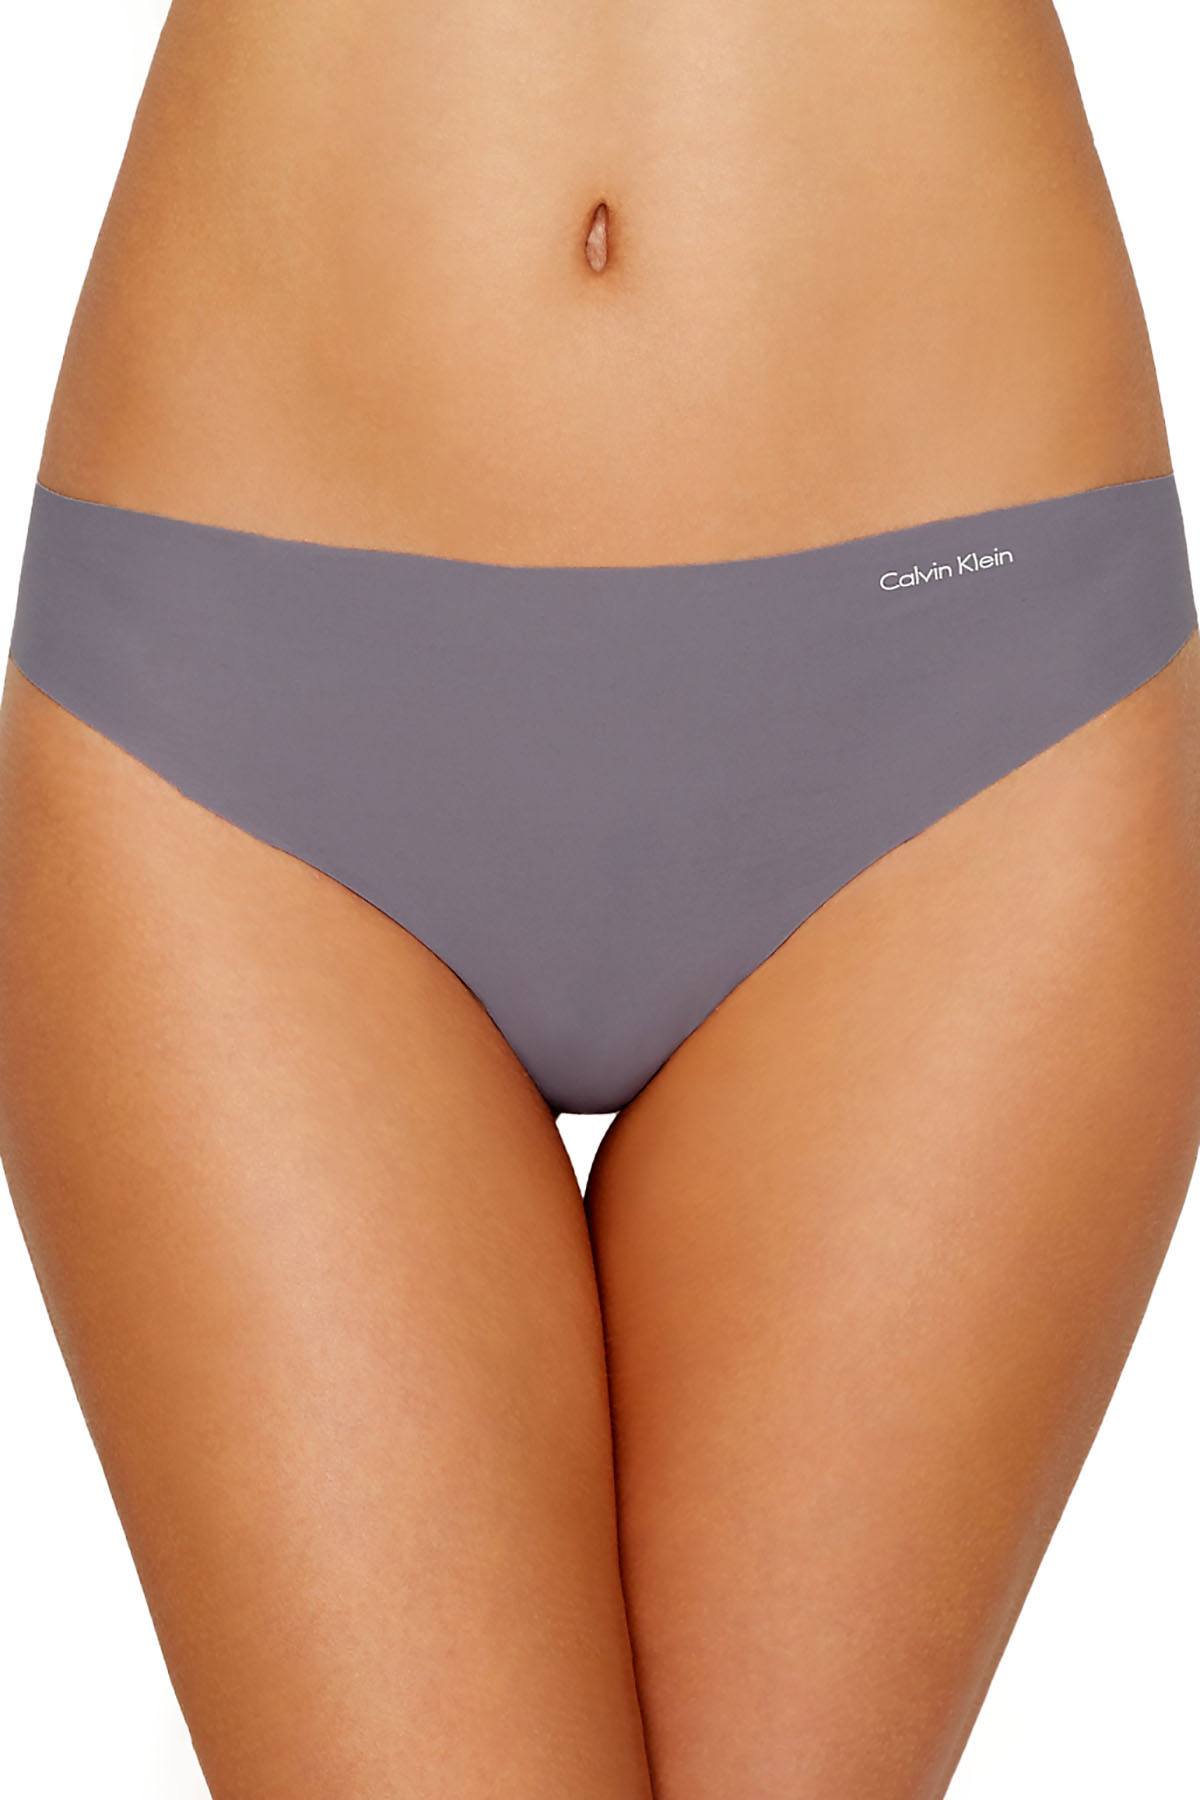 Calvin Klein Invisibles Thong in Harmony